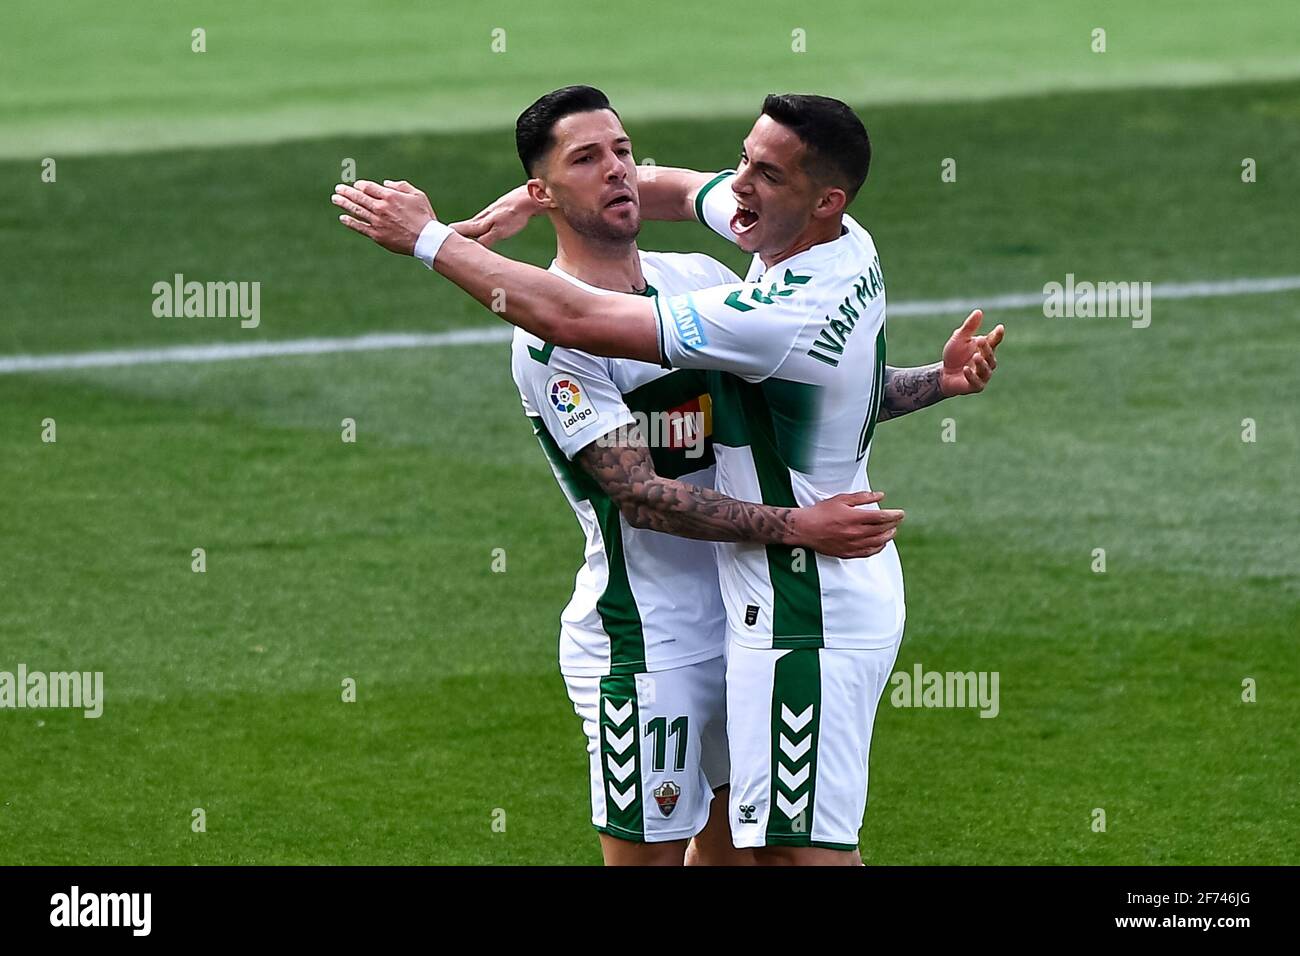 ELCHE, SPAIN - APRIL 4: Tete Morente of Elche CF and Ivan Marcone of Elche CF celebrate their sides first goal during the La Liga Santander match betw Stock Photo